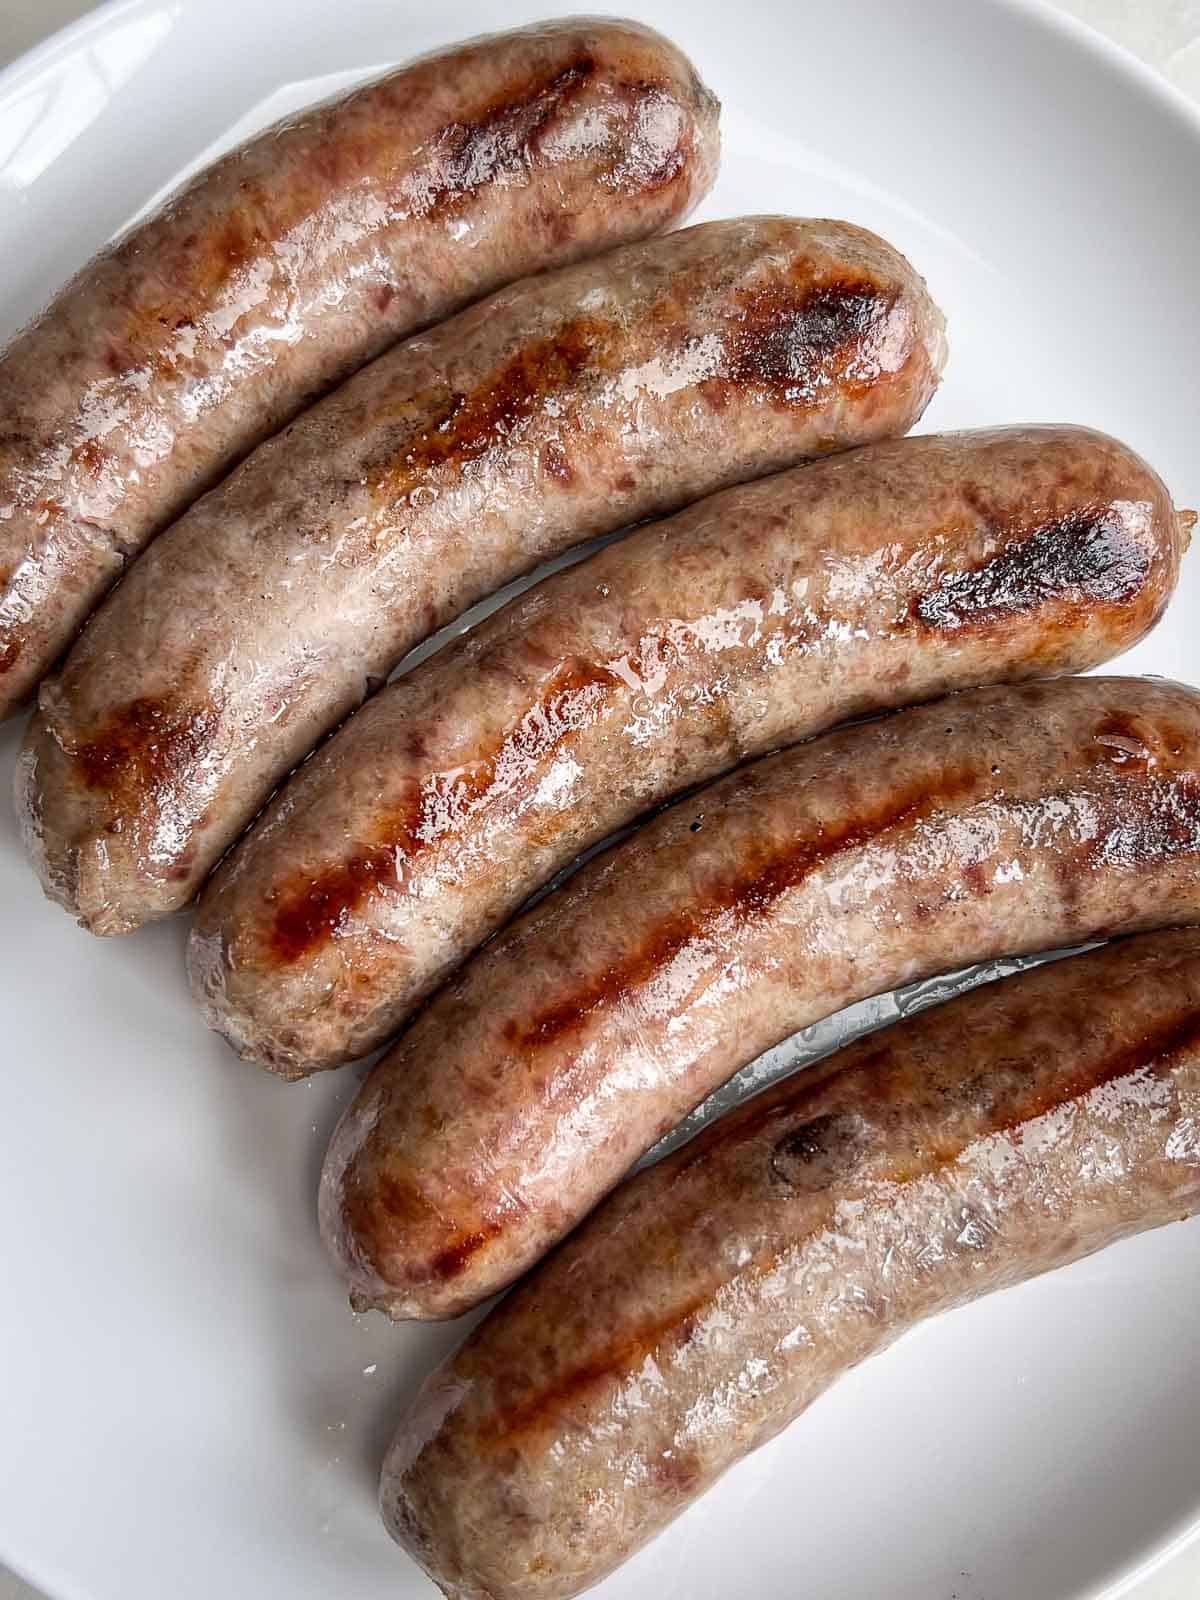 5 grilled beer brats lined up on a white plate.